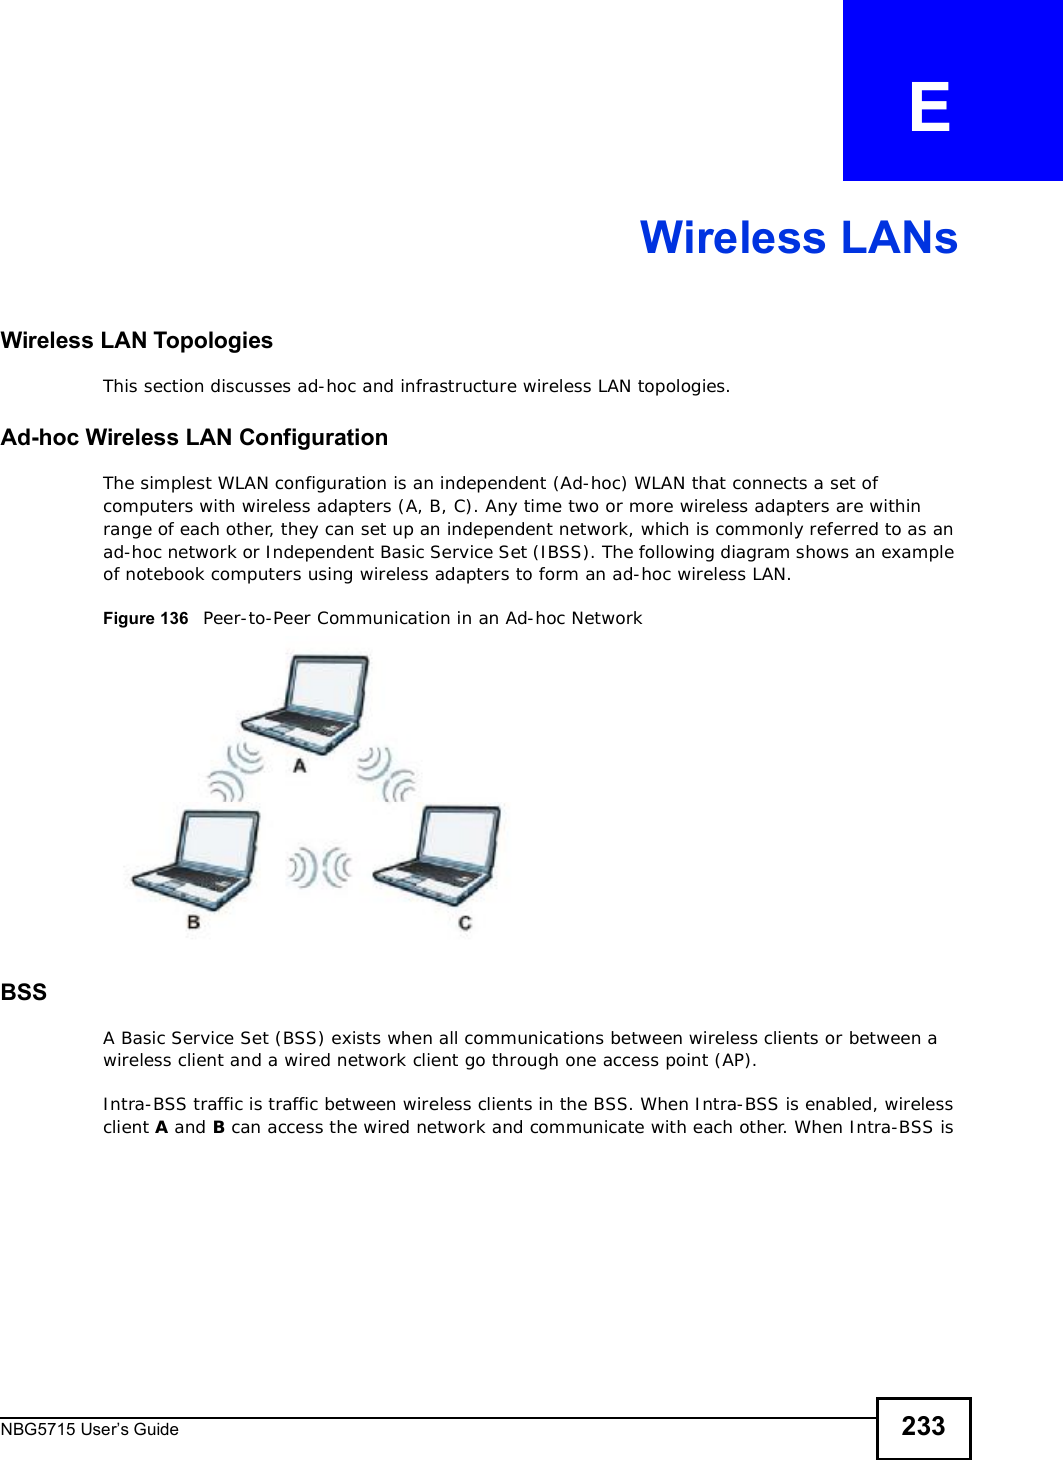 NBG5715 User’s Guide 233APPENDIX   EWireless LANsWireless LAN TopologiesThis section discusses ad-hoc and infrastructure wireless LAN topologies.Ad-hoc Wireless LAN ConfigurationThe simplest WLAN configuration is an independent (Ad-hoc) WLAN that connects a set of computers with wireless adapters (A, B, C). Any time two or more wireless adapters are within range of each other, they can set up an independent network, which is commonly referred to as an ad-hoc network or Independent Basic Service Set (IBSS). The following diagram shows an example of notebook computers using wireless adapters to form an ad-hoc wireless LAN. Figure 136   Peer-to-Peer Communication in an Ad-hoc NetworkBSSA Basic Service Set (BSS) exists when all communications between wireless clients or between a wireless client and a wired network client go through one access point (AP). Intra-BSS traffic is traffic between wireless clients in the BSS. When Intra-BSS is enabled, wireless client A and B can access the wired network and communicate with each other. When Intra-BSS is 